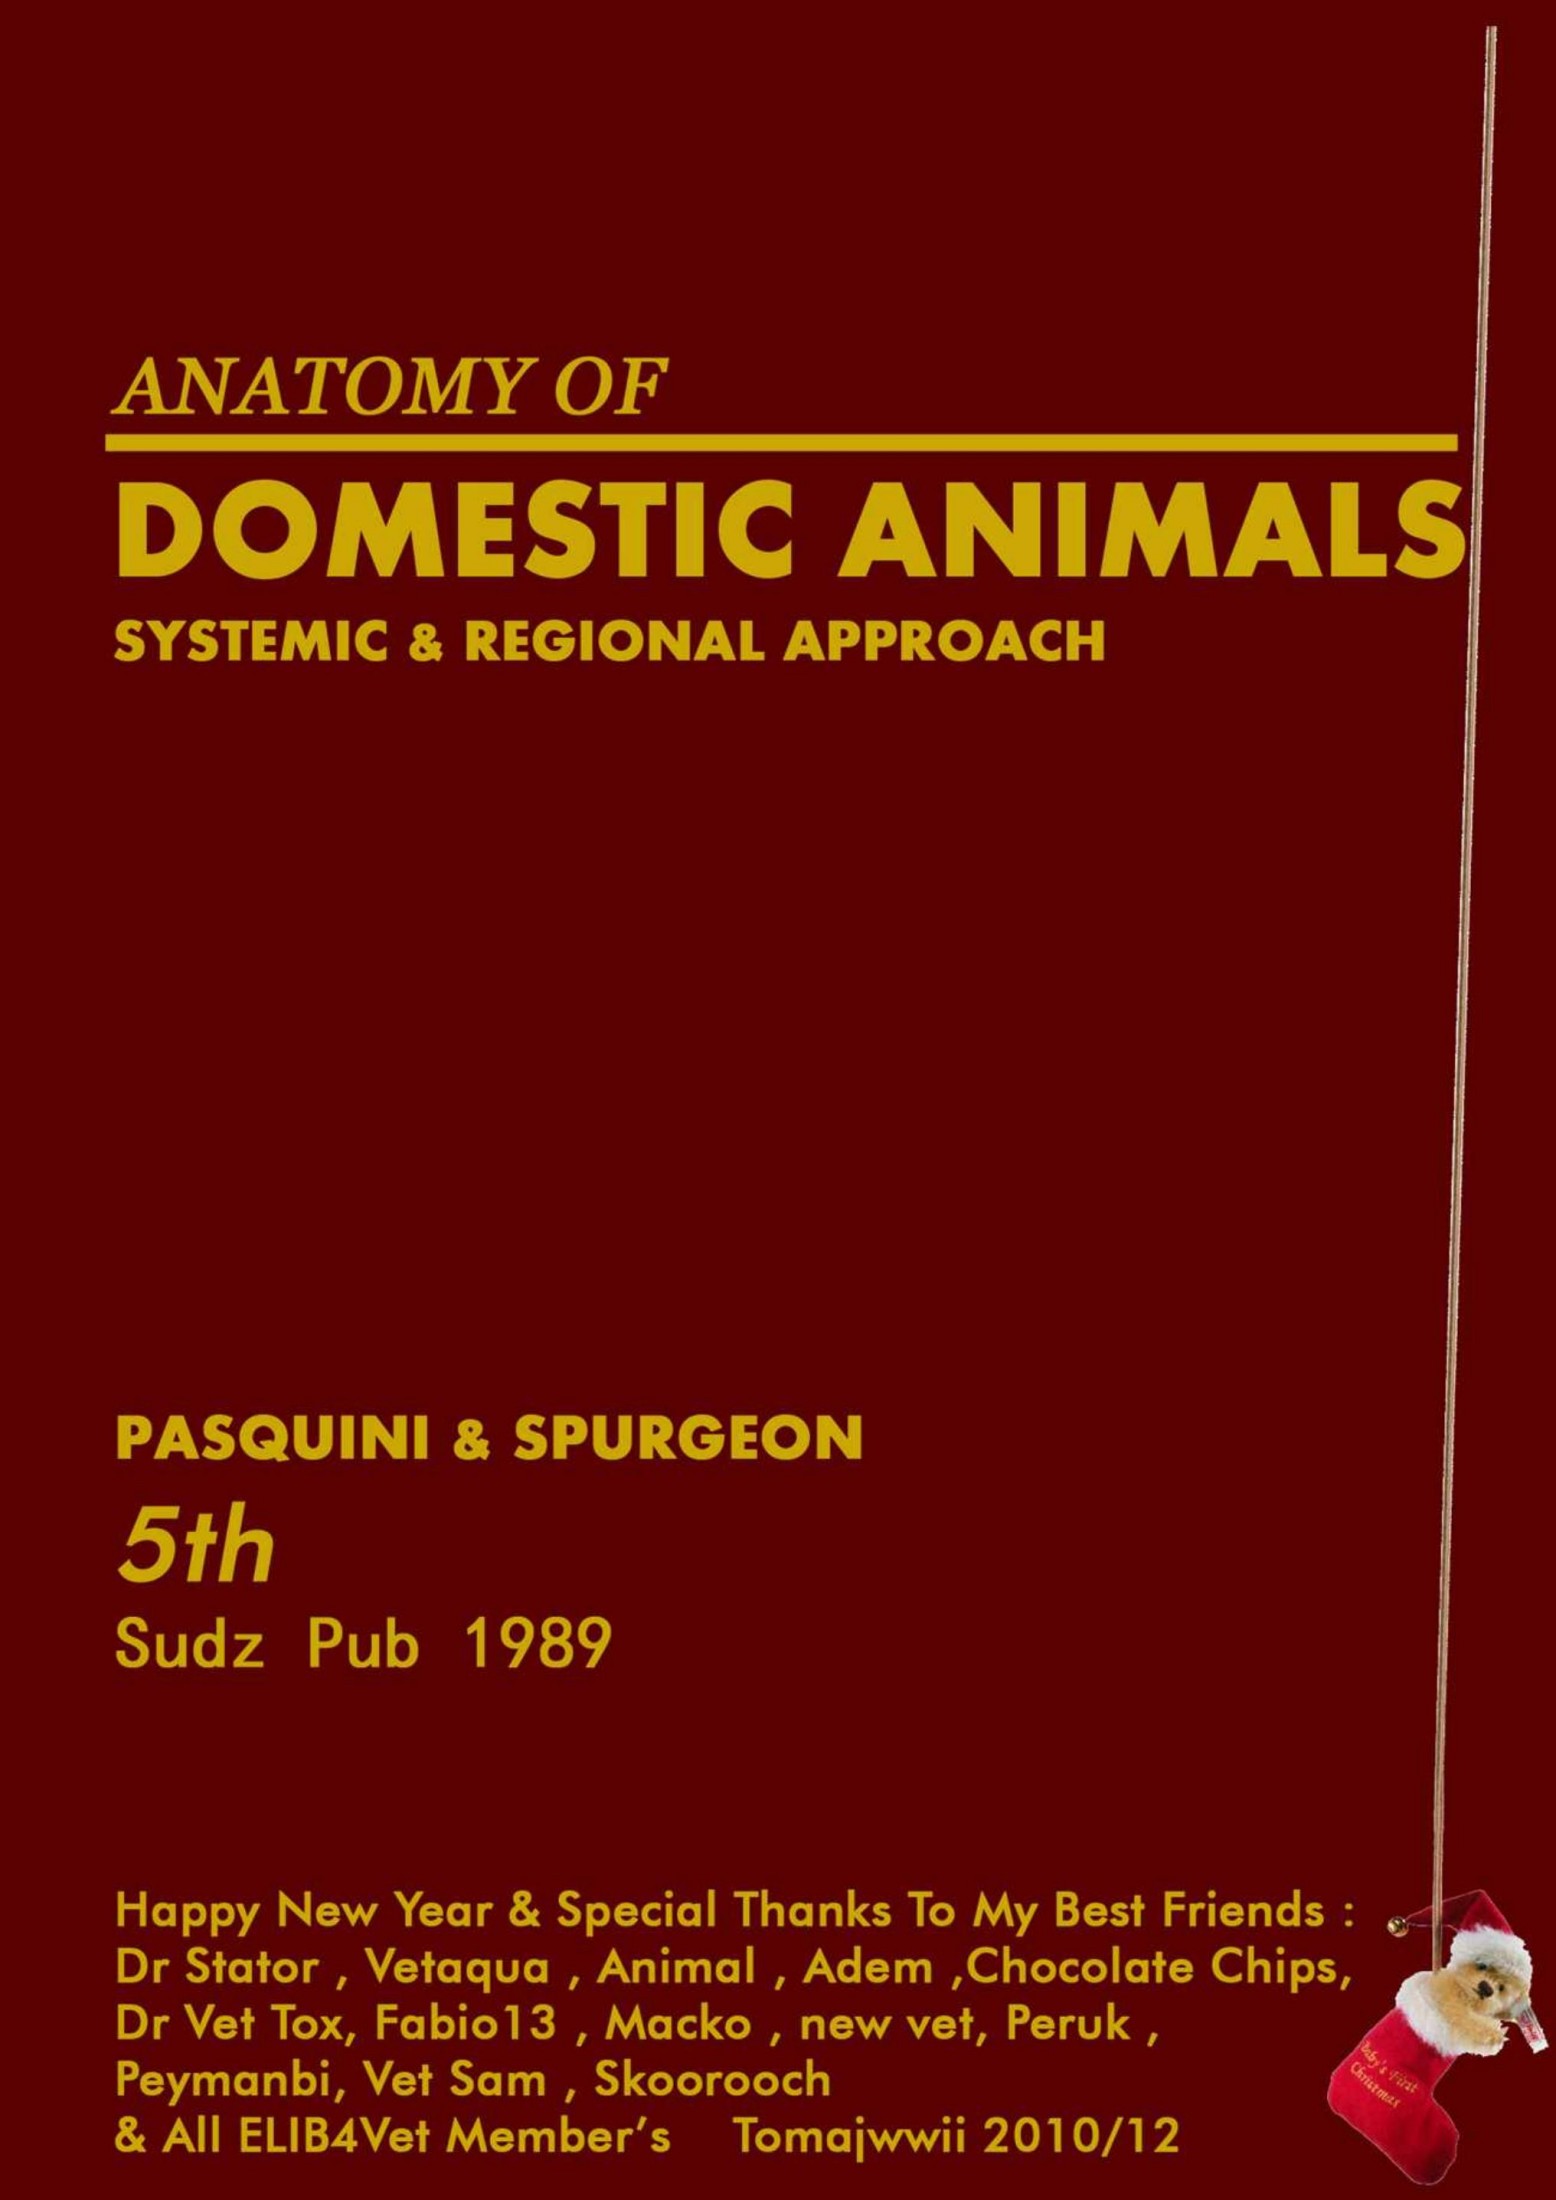 Anatomy of Domestic Animals Systemic & Regional Approach 1989